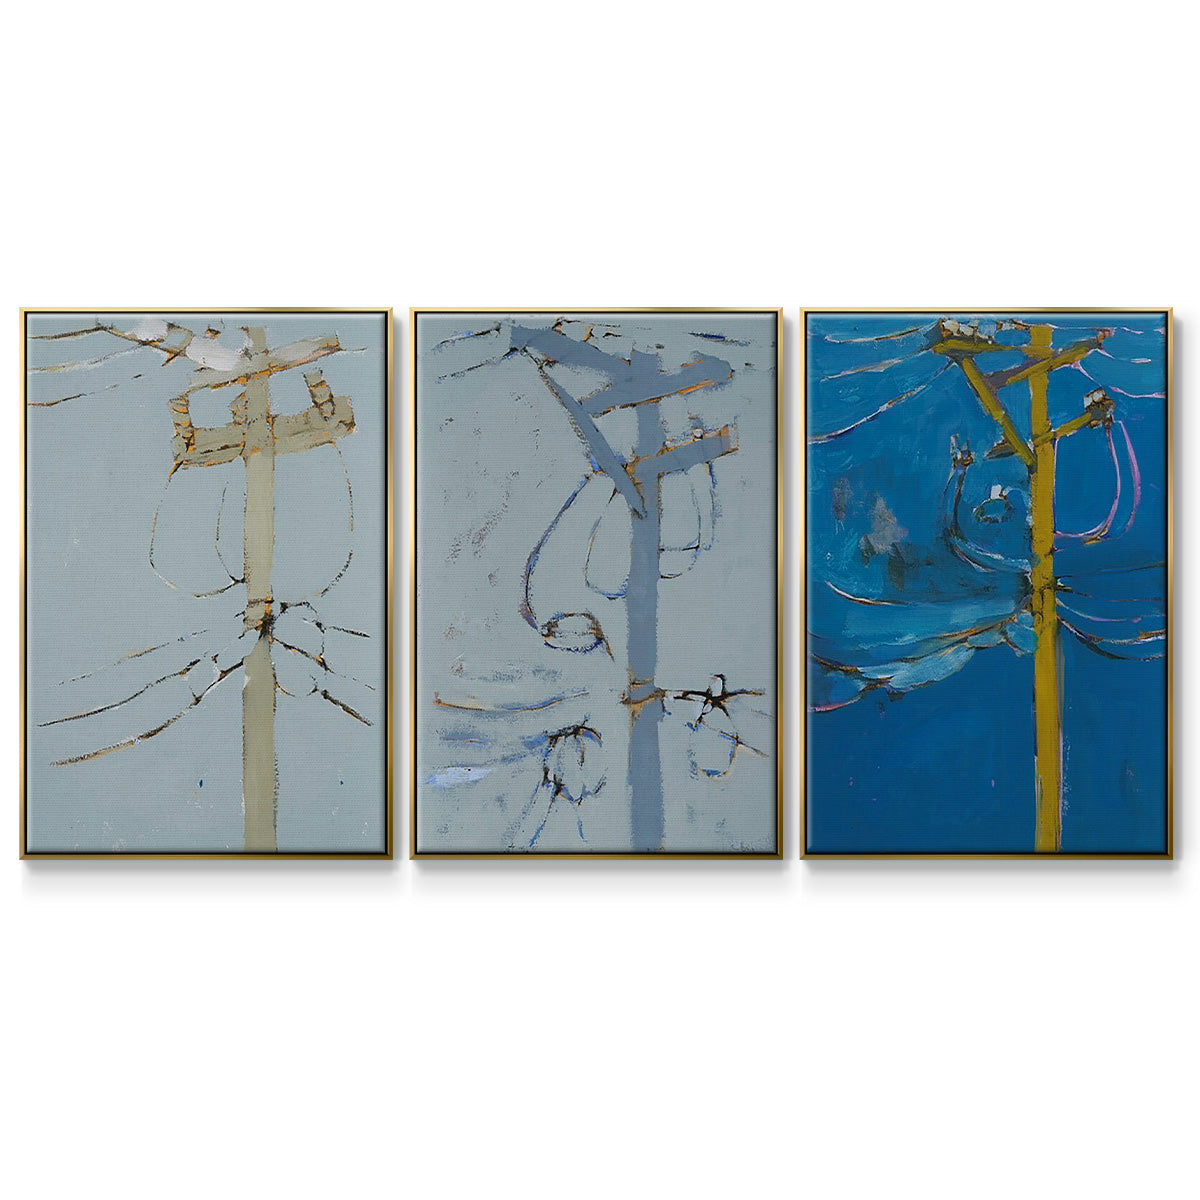 Wires IV - Framed Premium Gallery Wrapped Canvas L Frame 3 Piece Set - Ready to Hang